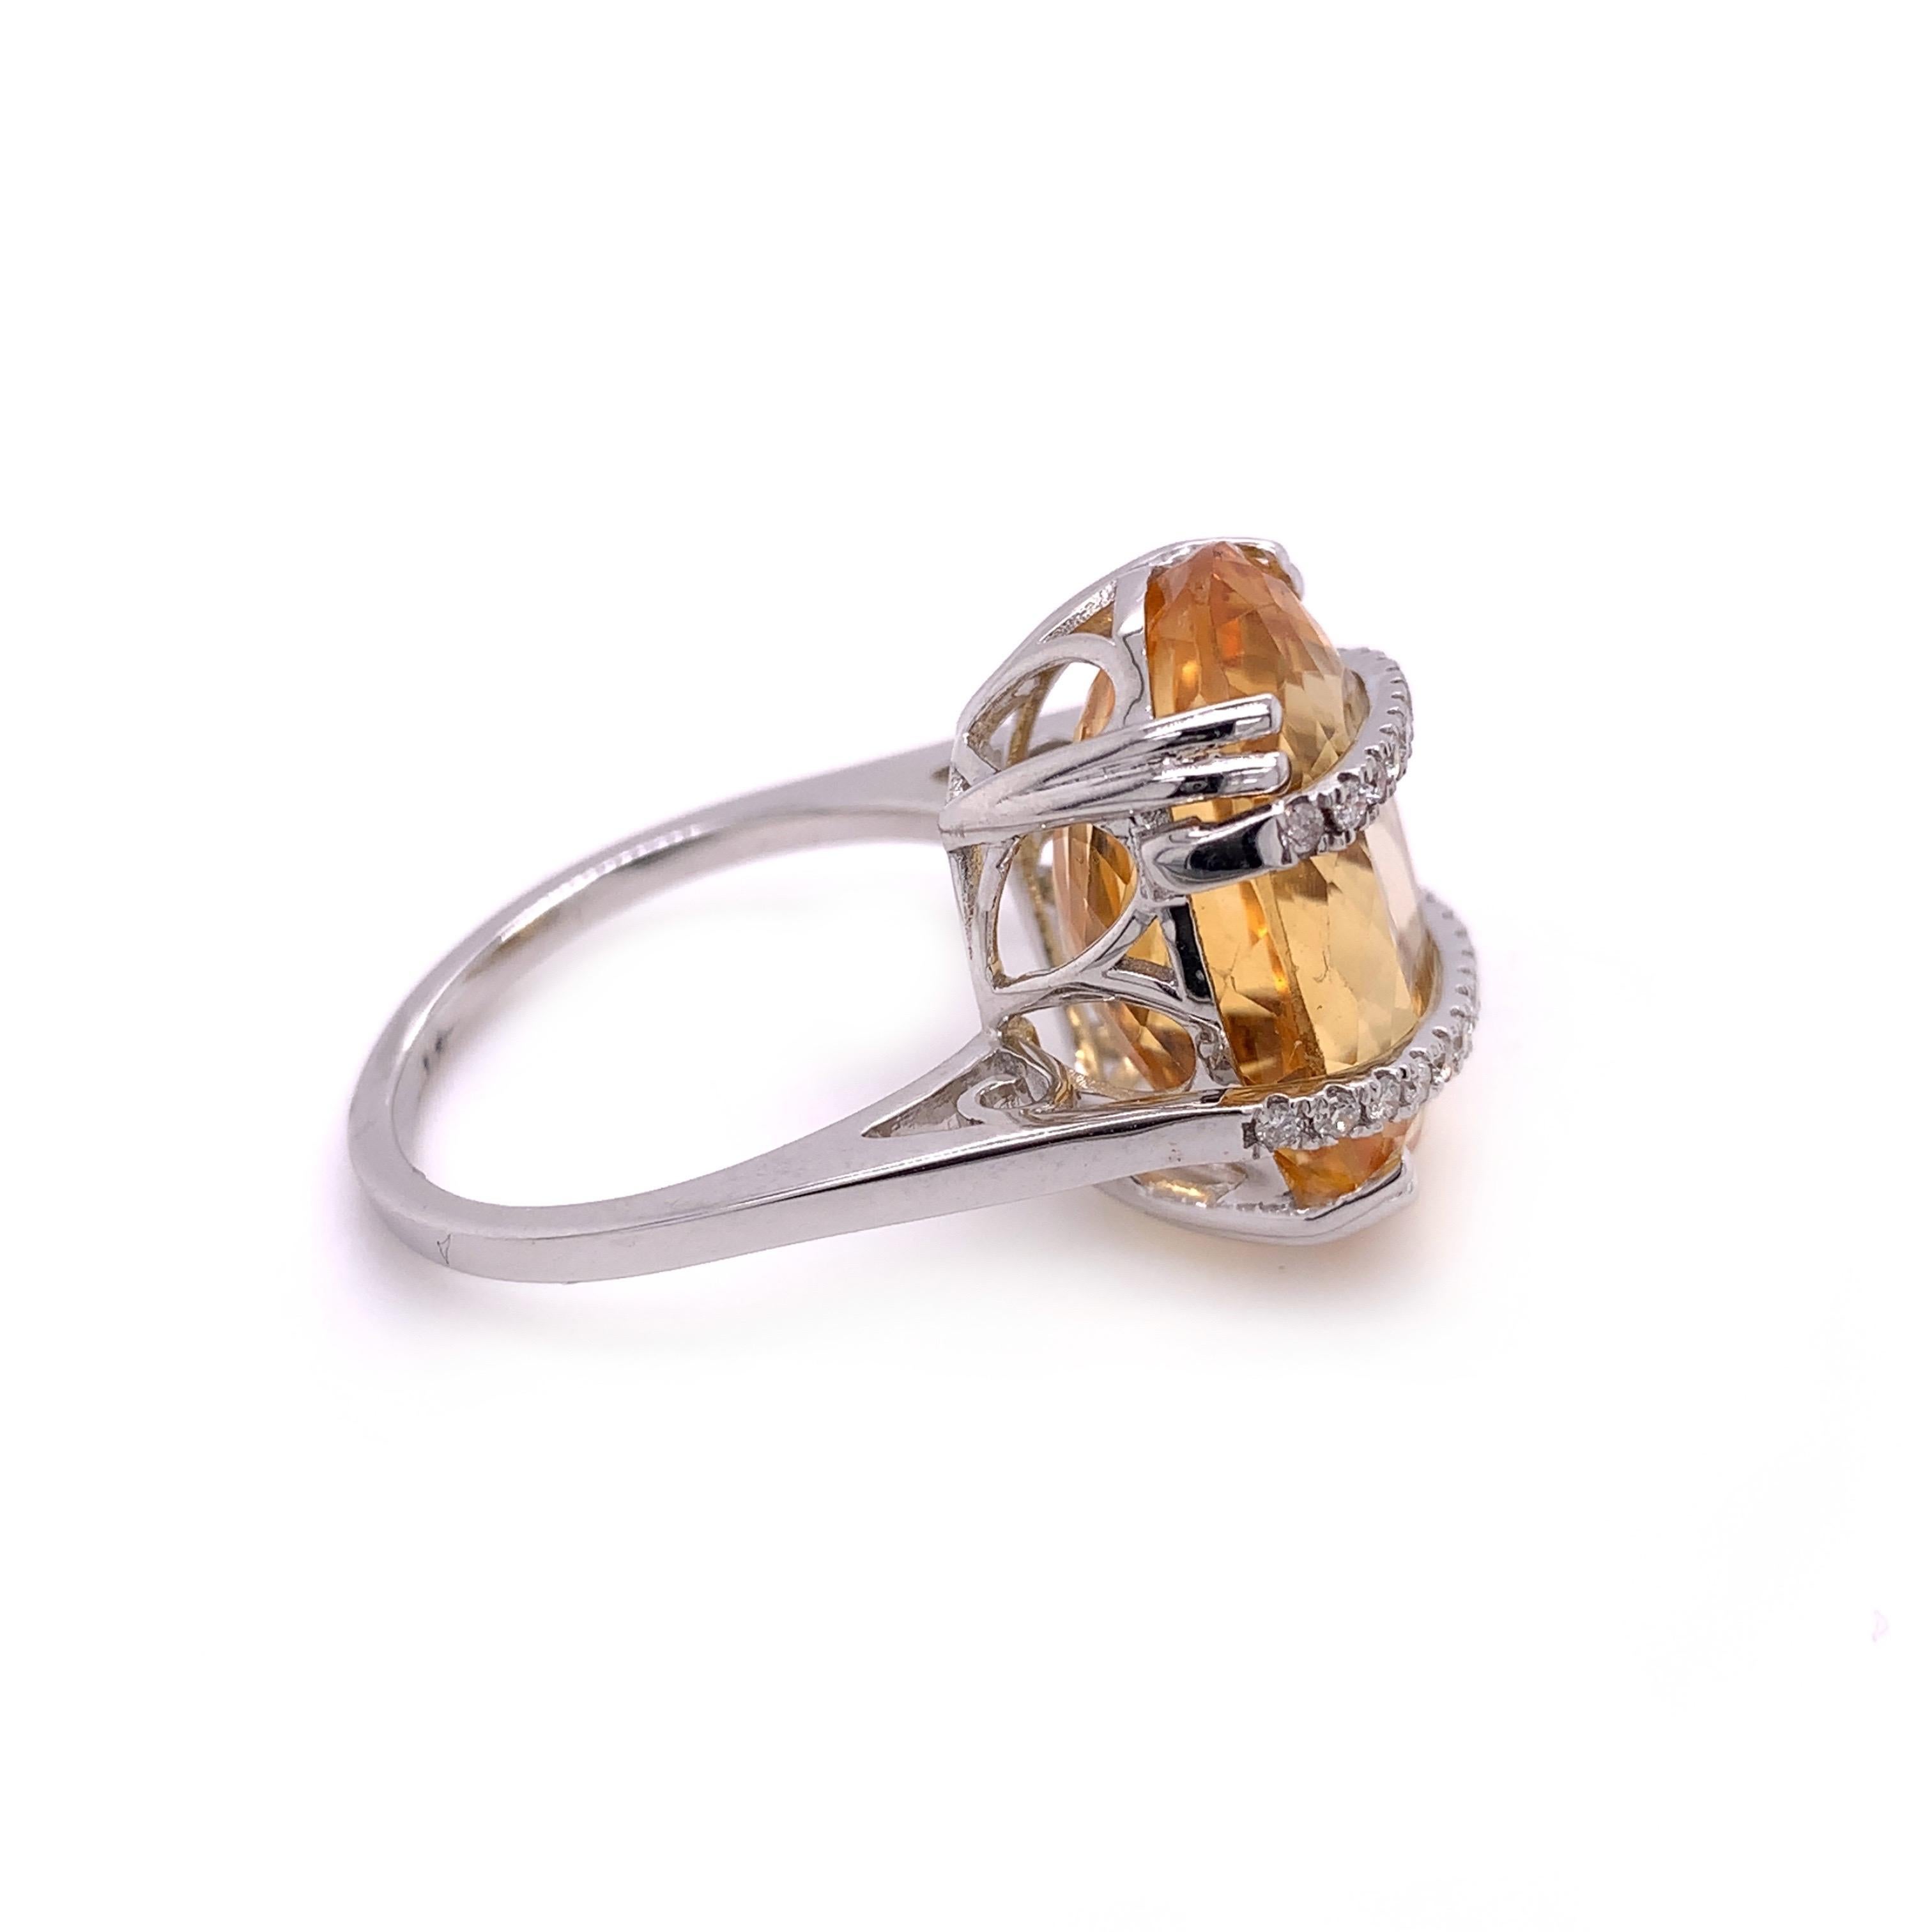 Glamorous citrine diamond ring. Sparkling, high luster, oval faceted, golden yellow, natural 13.11 carats citrine mounted in open basket high profile with eight bead prongs, accented with two rows of round brilliant cut diamonds. Handcrafted